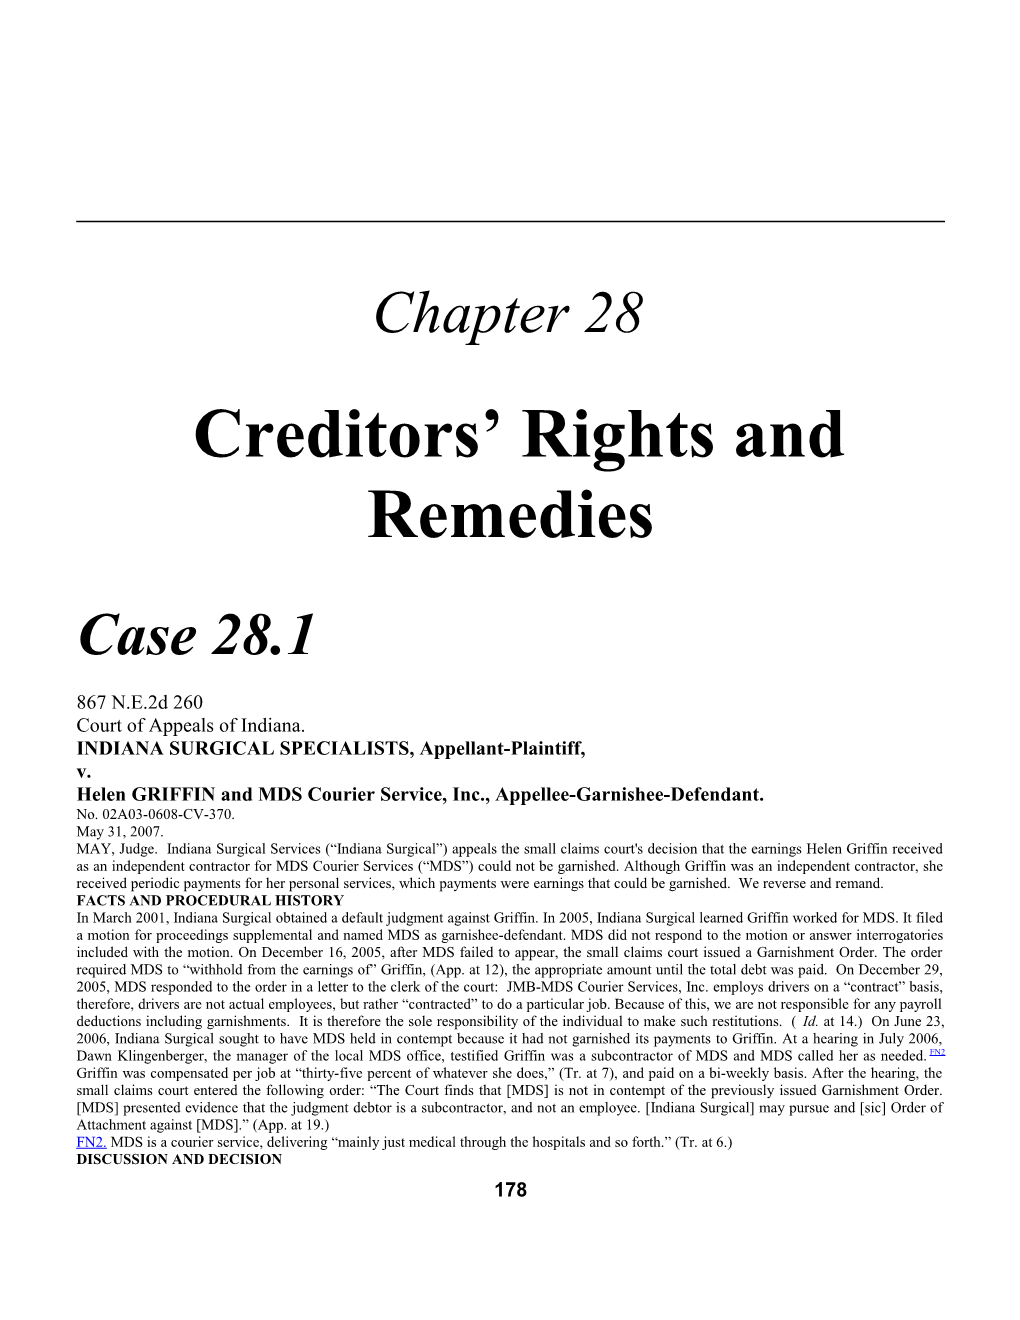 Chapter 28: Creditors Rights and Remedies 437